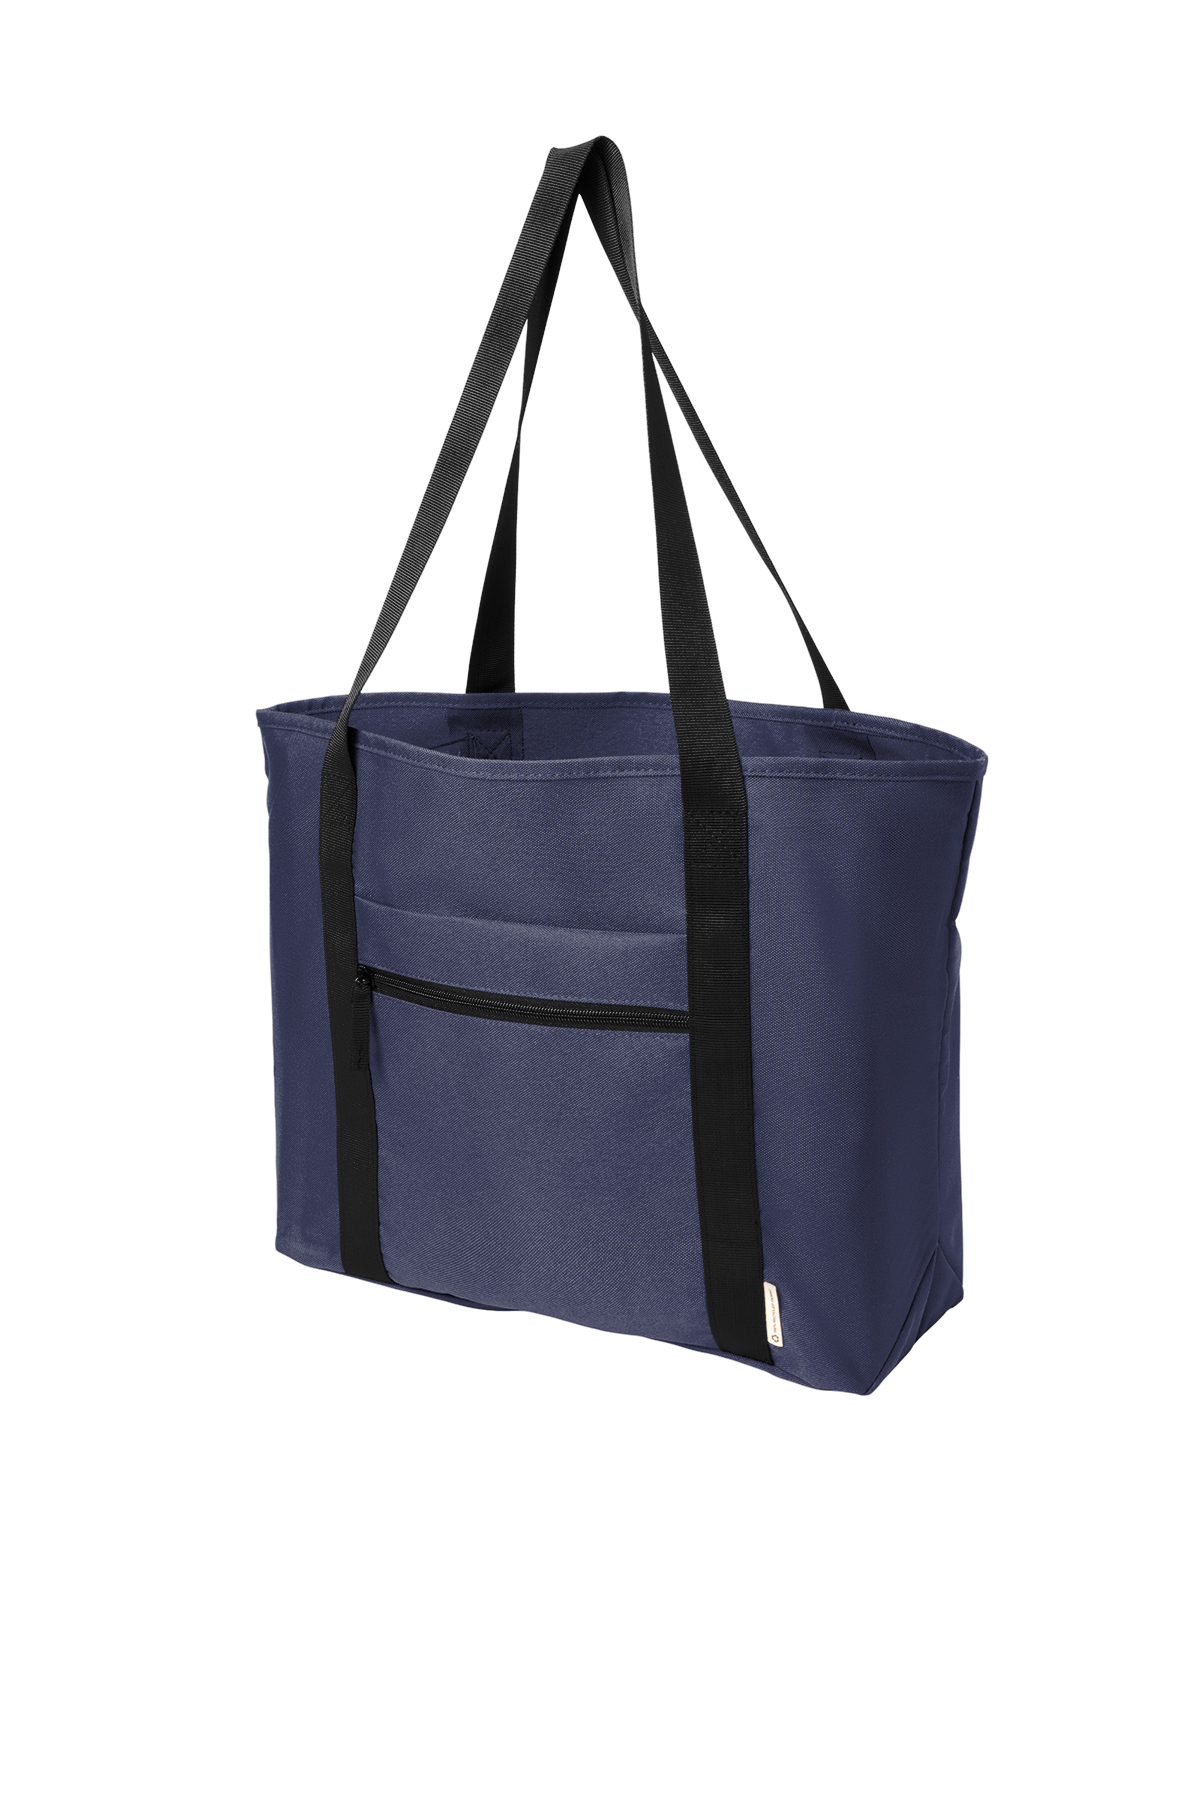 Port Authority C-FREE Recycled Tote | Product | Port Authority